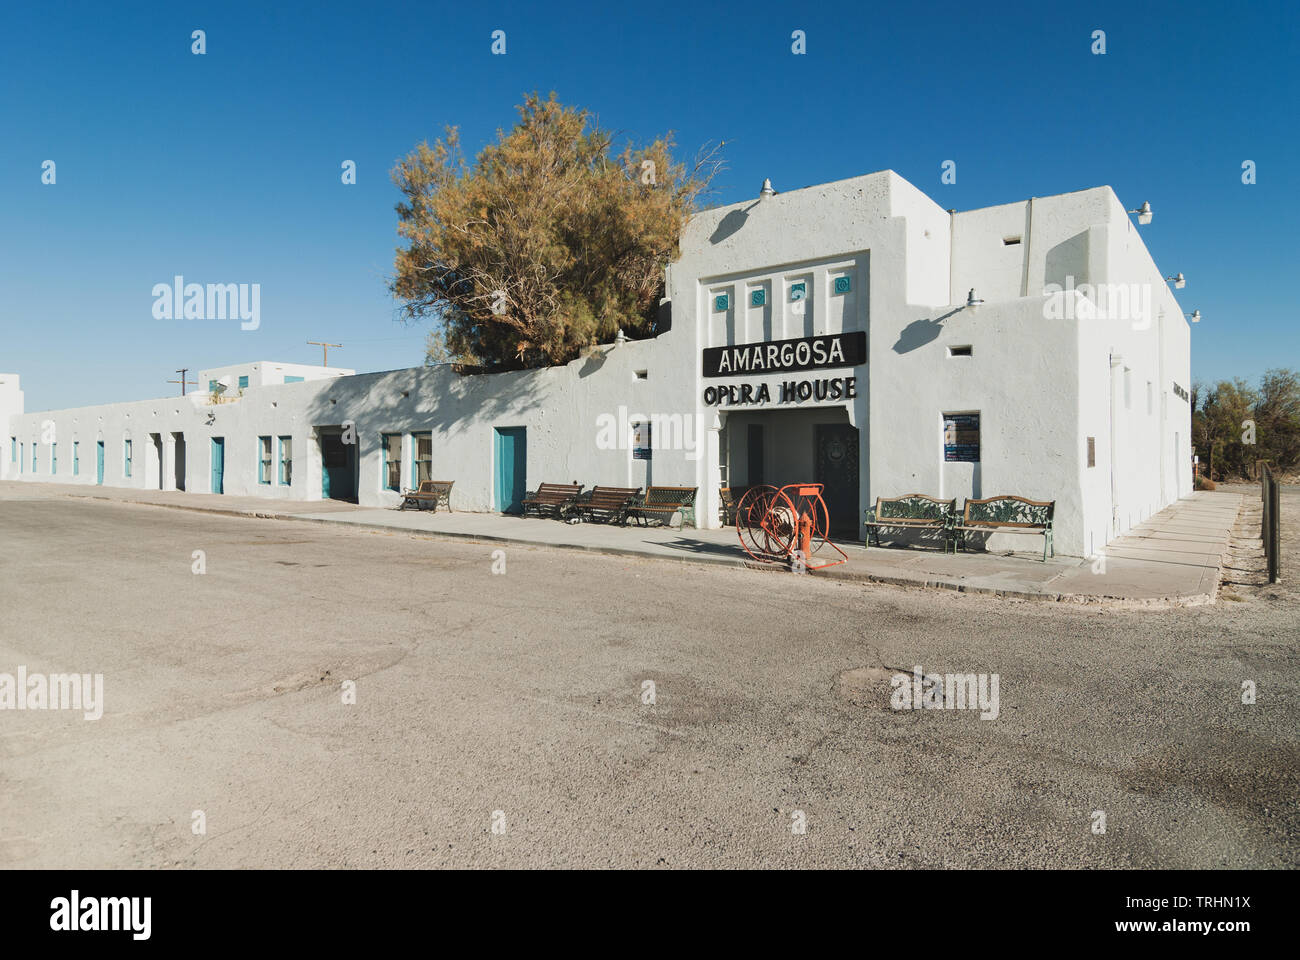 Amargosa Opera House in Death Valley Junction in California. This building is listed in the National Register of Historic Places. Stock Photo